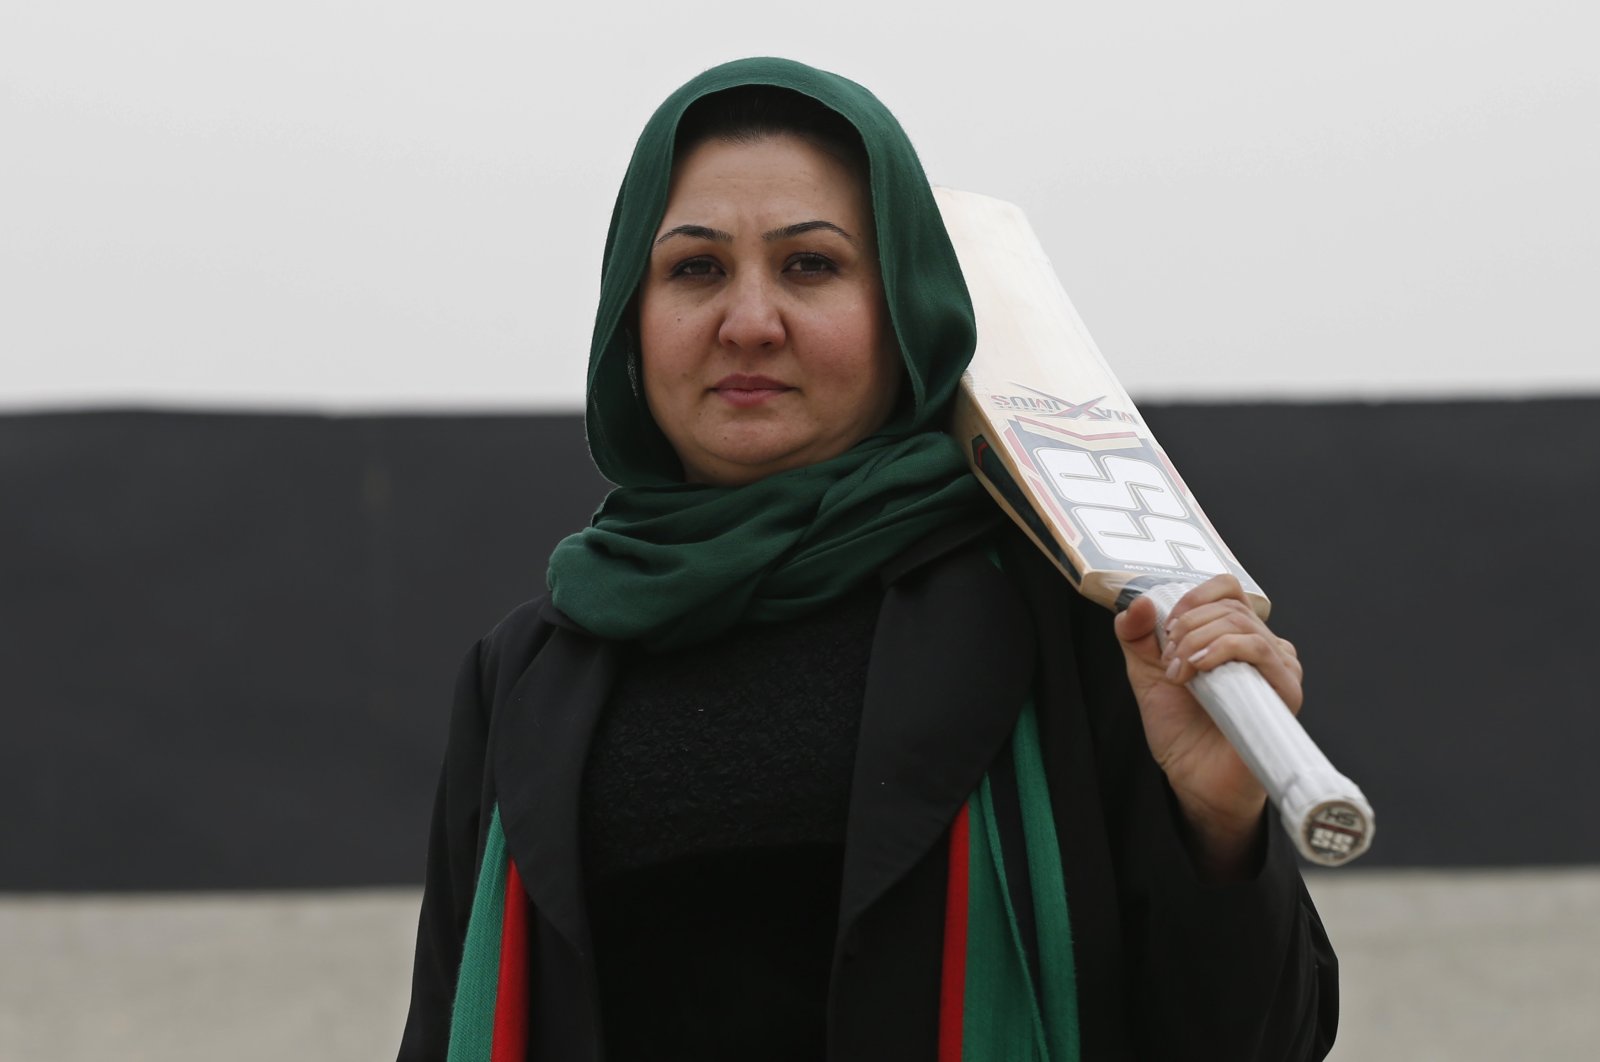 The founder of the national women's team, Afghan Diana Barakzai, poses for a picture at the Kabul Cricket Stadium, Afghanistan, Dec. 24, 2014. (Reuters Photo)